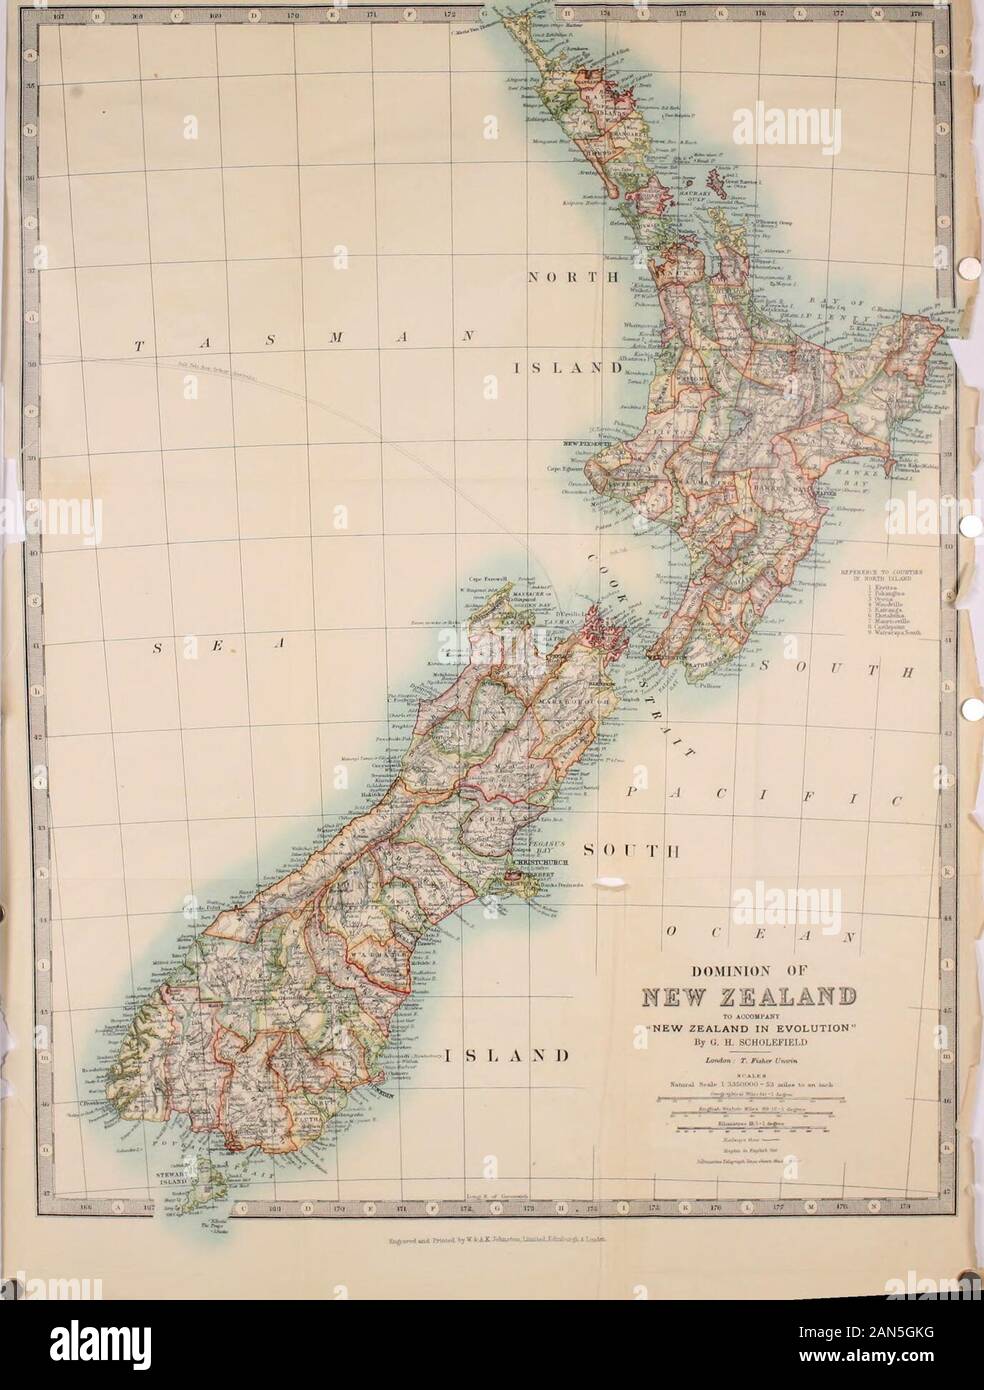 New Zealand in evolution, industrial, economic and political; . 230-2  Minimum not the Maximum, 218-19 Protection and wages, 293-94 Sweating  Commission Report, 204-5Wakefield, Edward Gibbon, 21 Colonising ideals, 21,  31 Conflict with